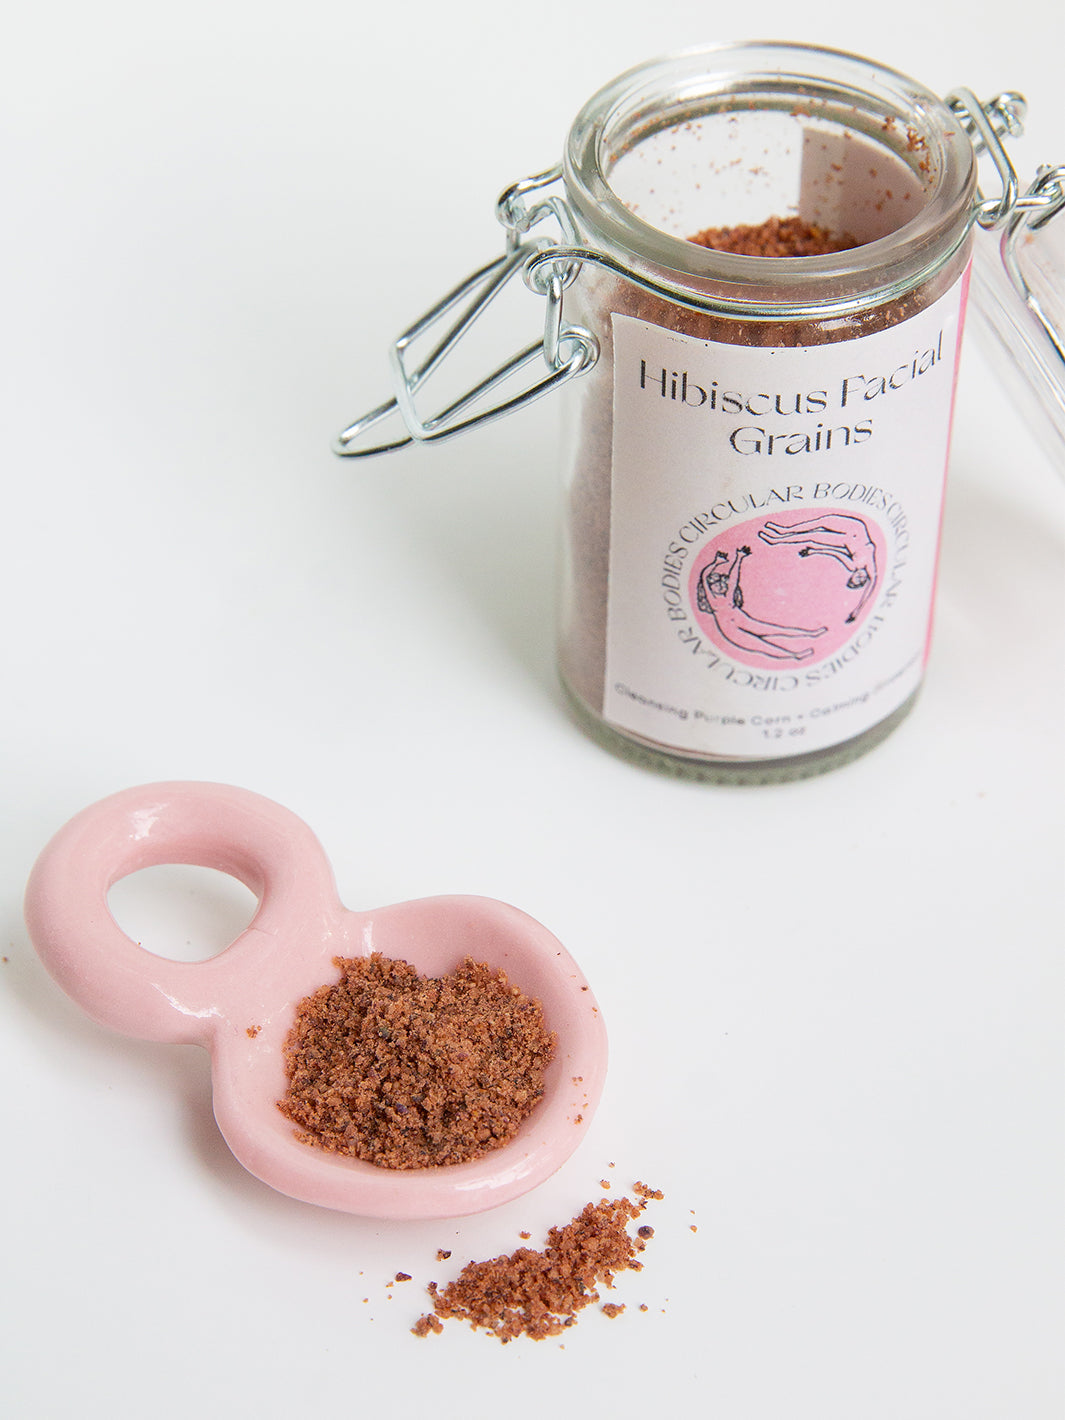 Discover Hibiscus Facial Grains - a 3-in-1 scrub, mask & cleanser! Exfoliate, cleanse, & nourish for balanced, radiant skin. Natural ingredients, all skin types, & eco-friendly. Shop & reveal your inner glow!